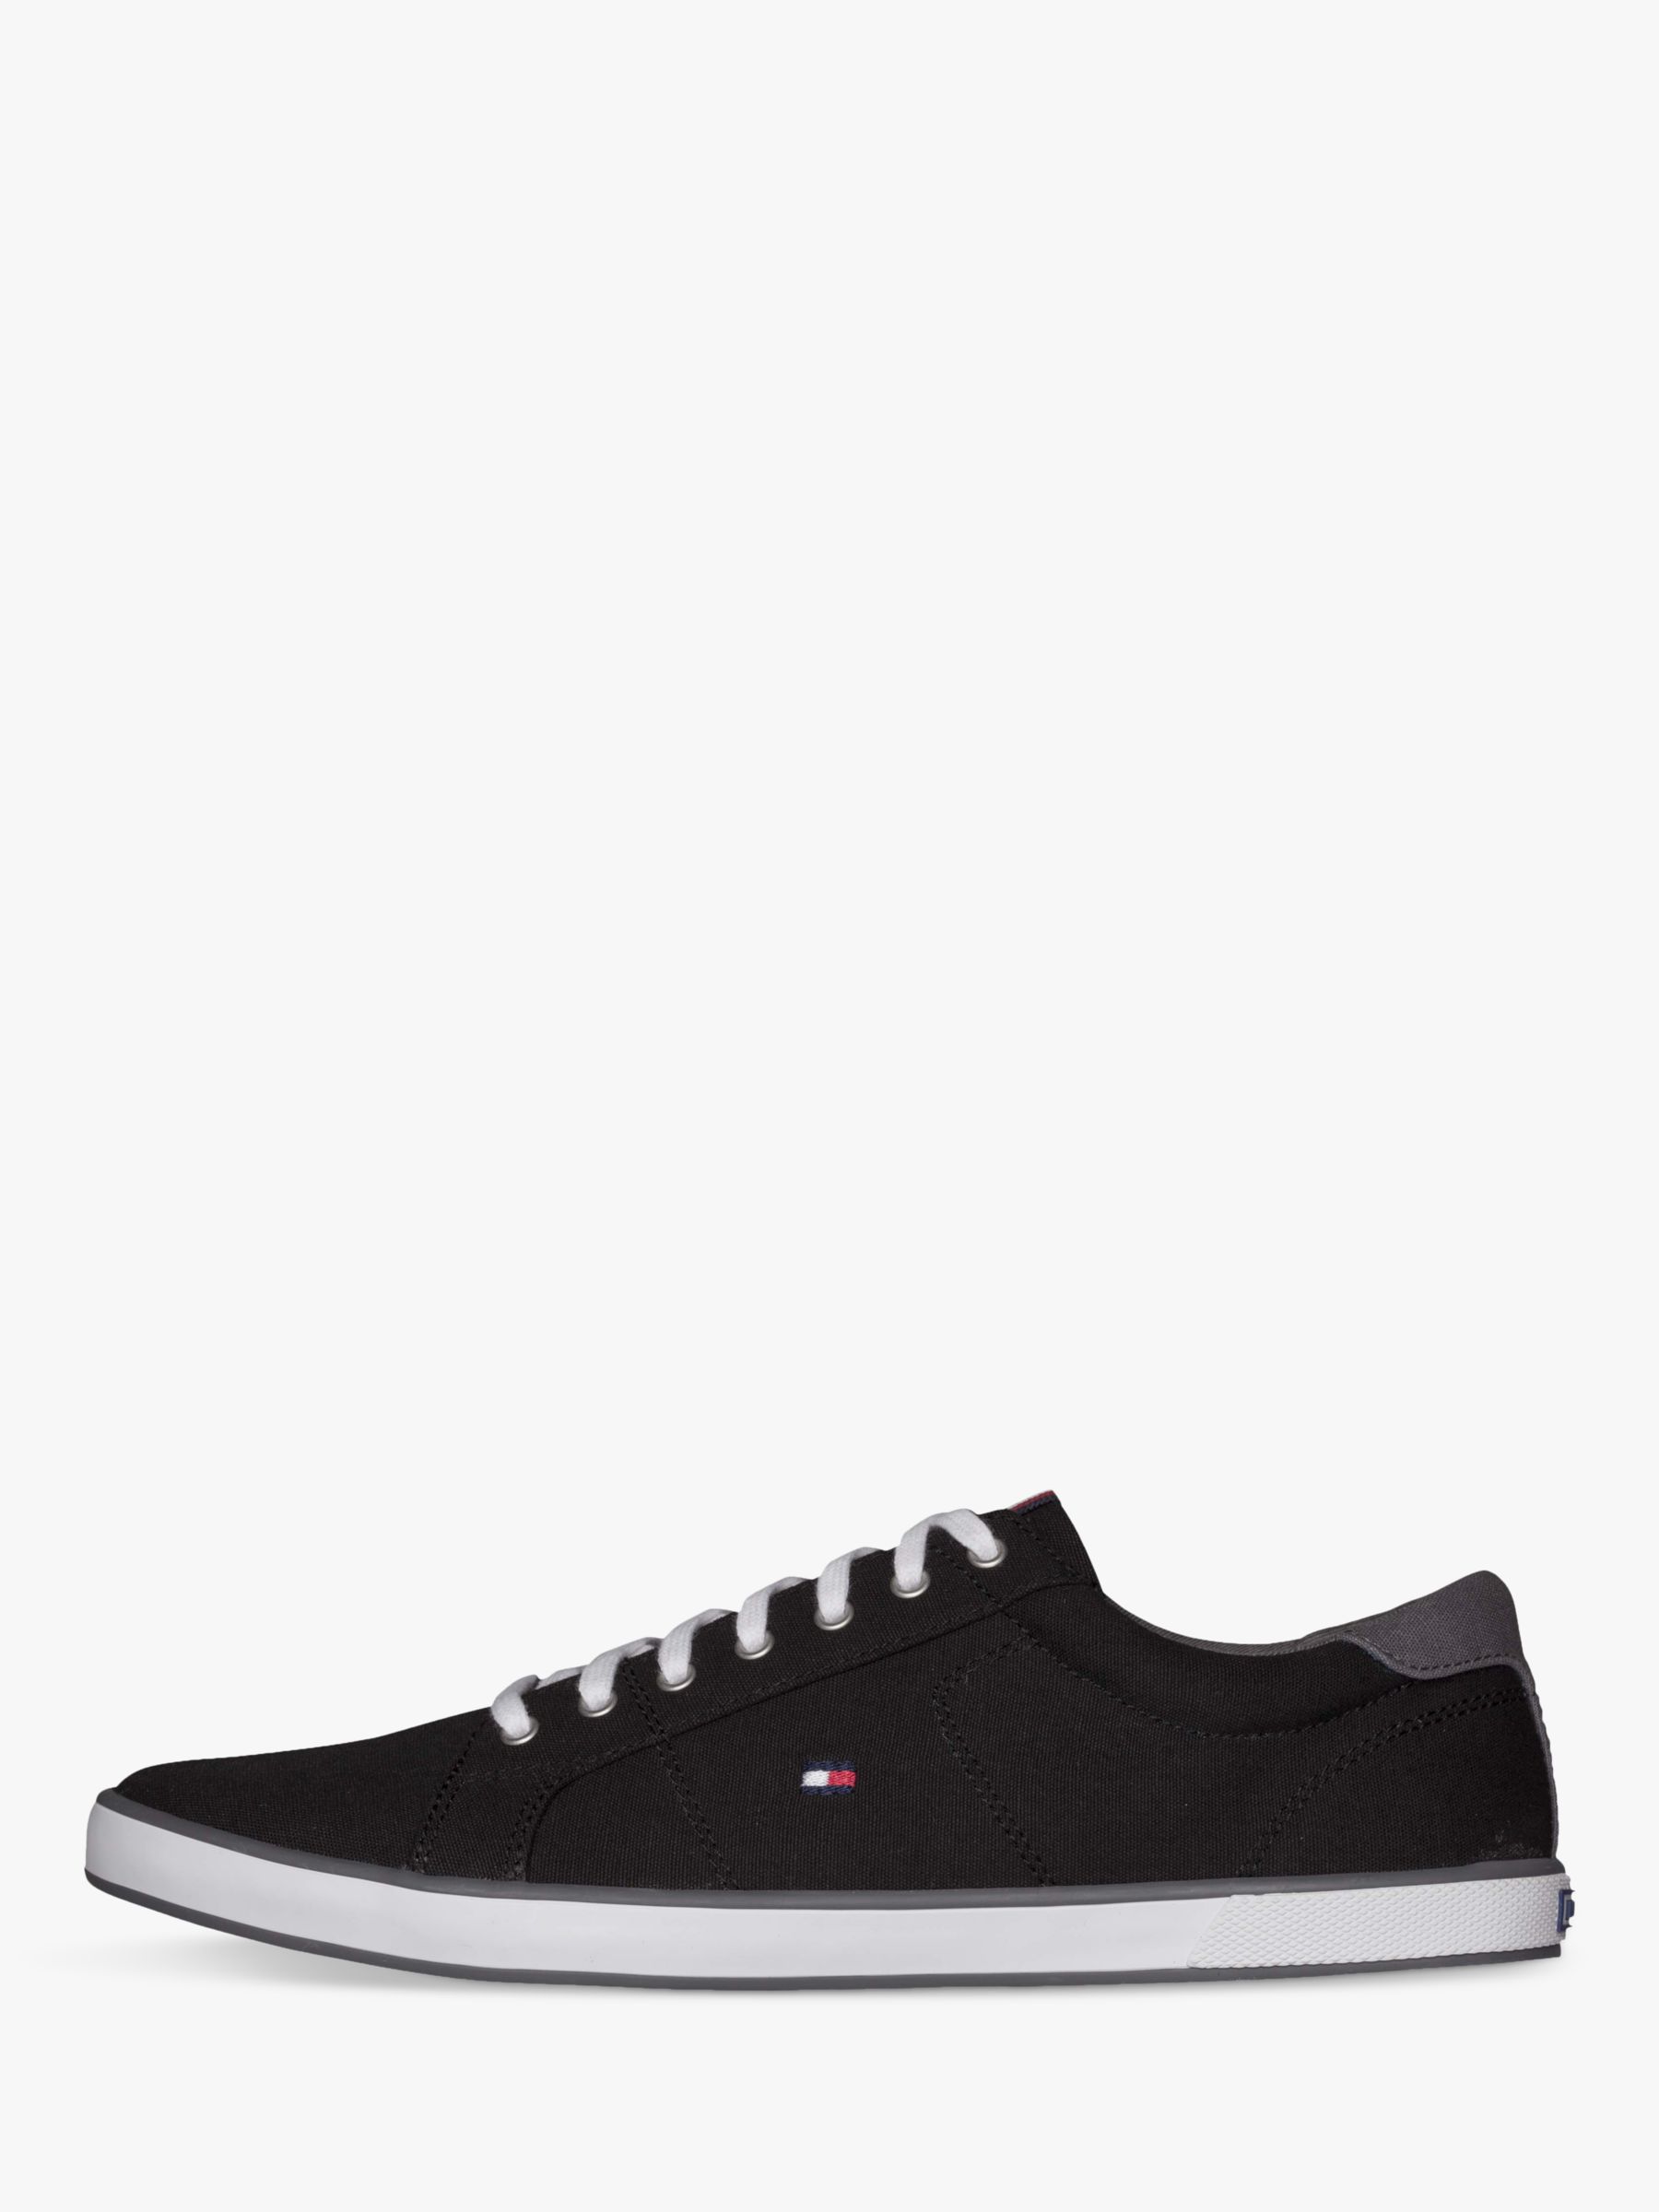 Tommy Hilfiger Canvas Lace-Up Trainers, Black, 6